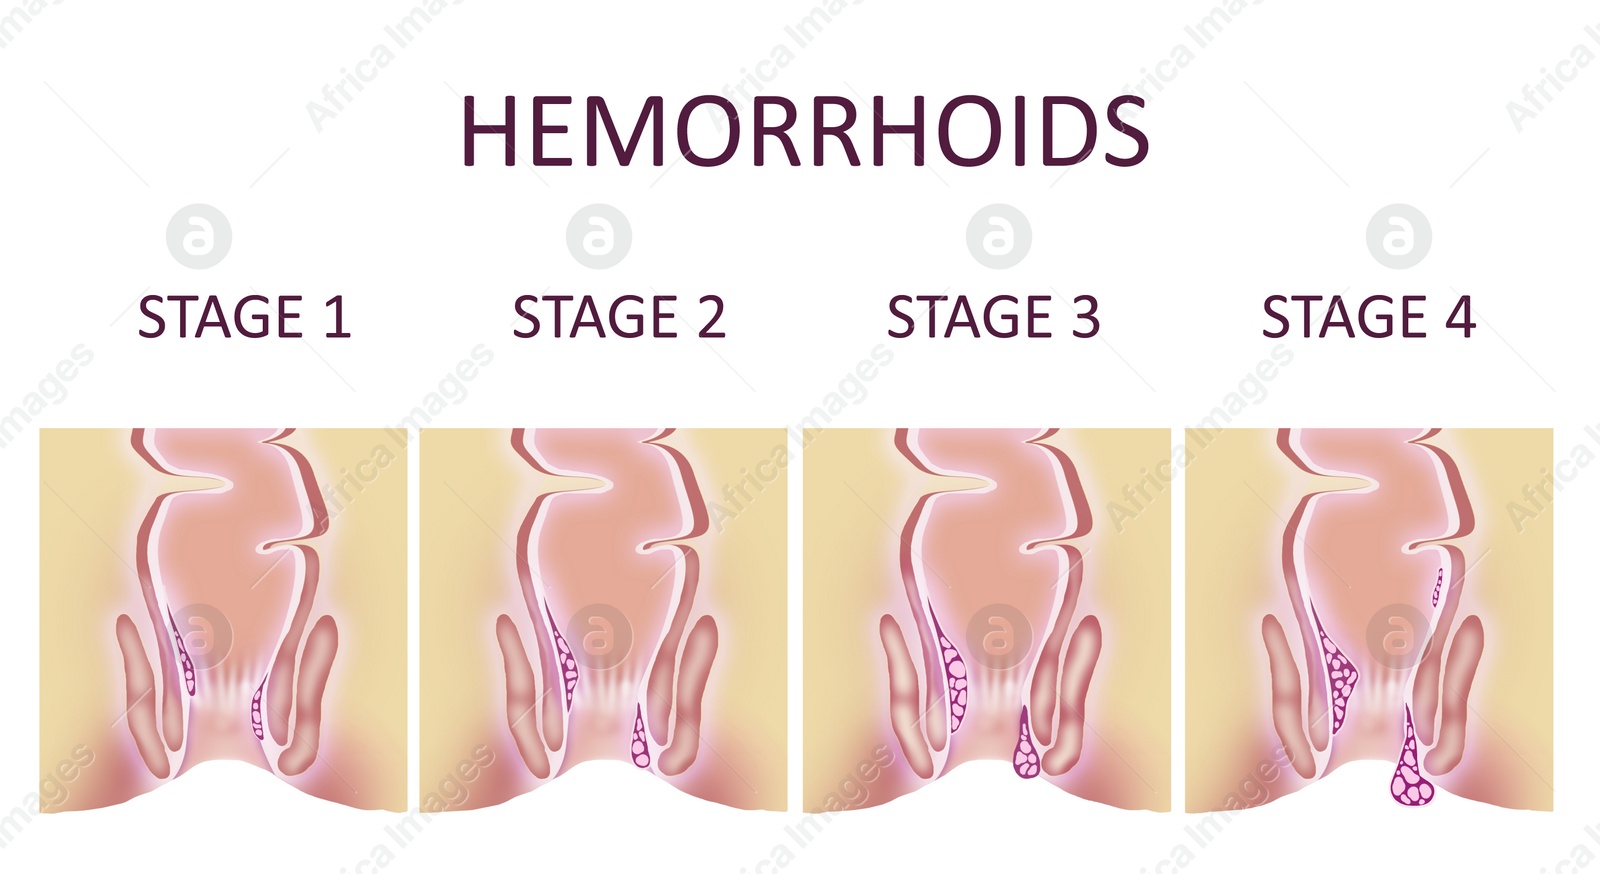 Image of Hemorrhoid stages. Illustration of unhealthy lower rectum with inflamed vascular structures, banner design